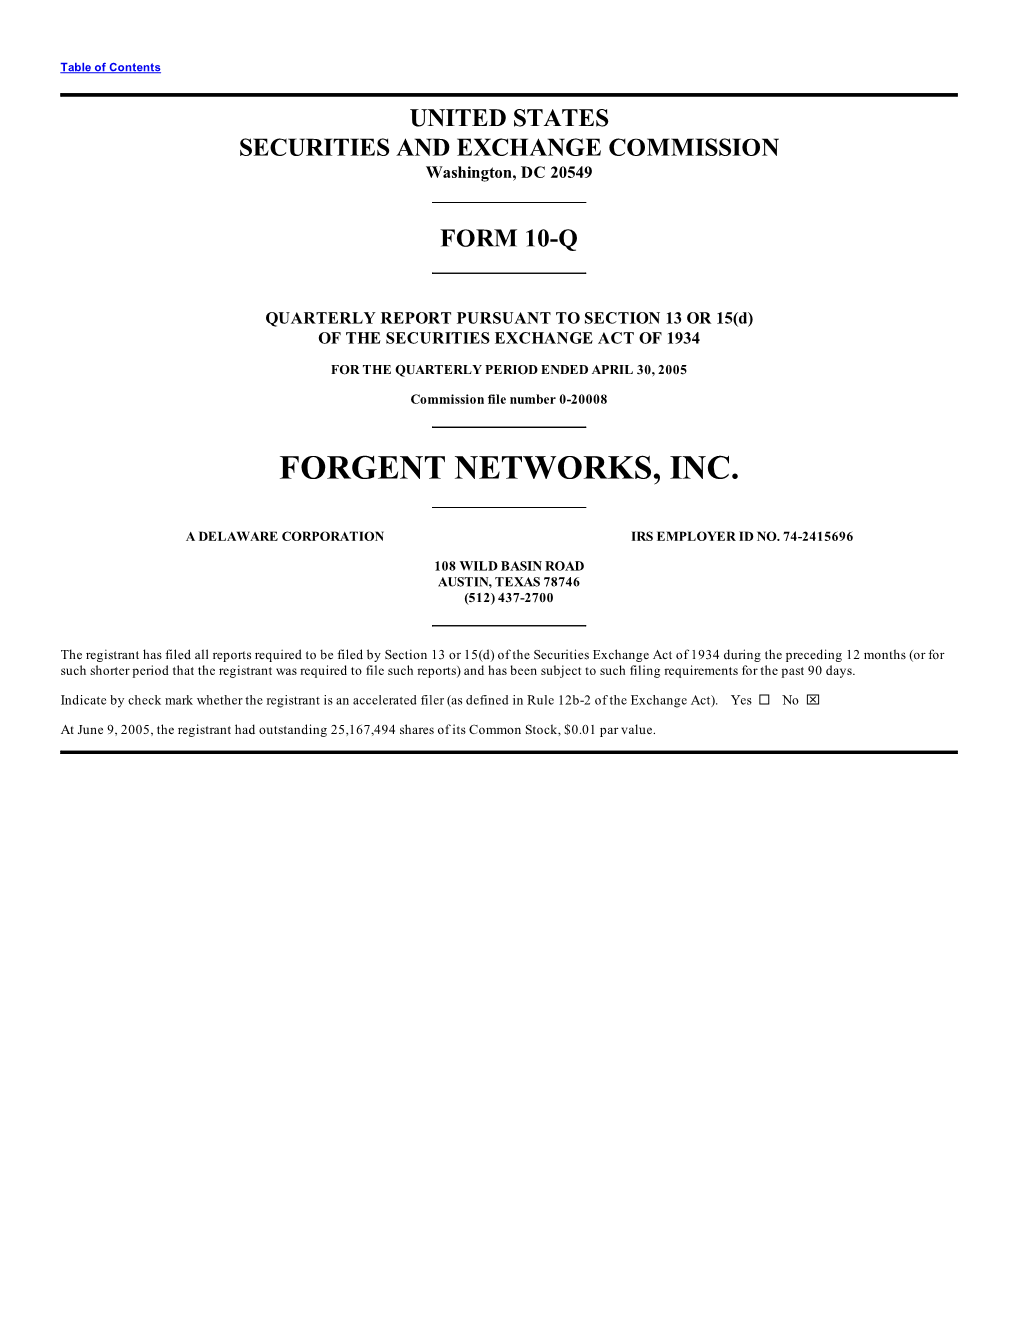 Forgent Networks, Inc